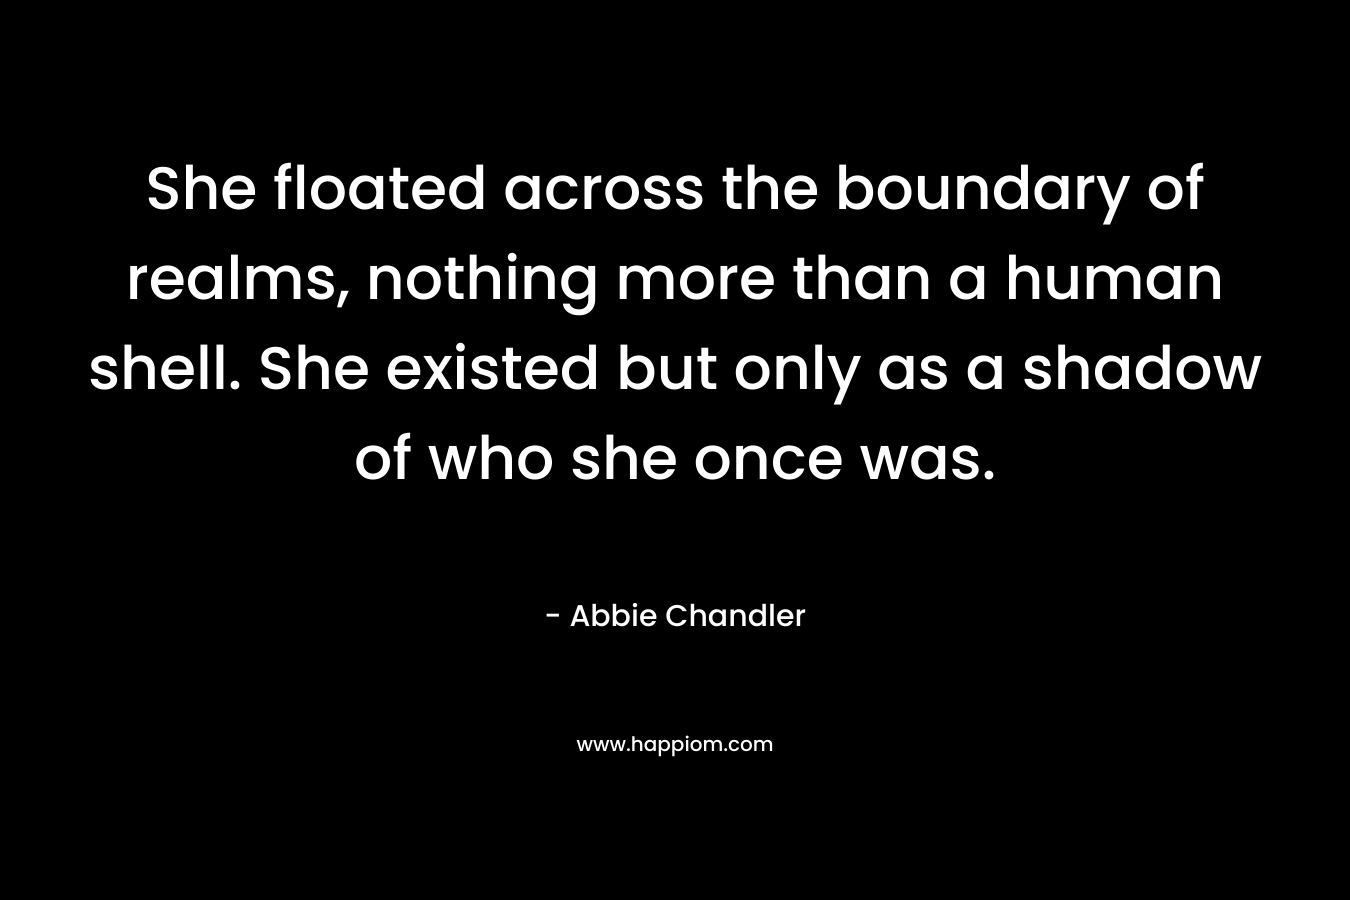 She floated across the boundary of realms, nothing more than a human shell. She existed but only as a shadow of who she once was. – Abbie Chandler